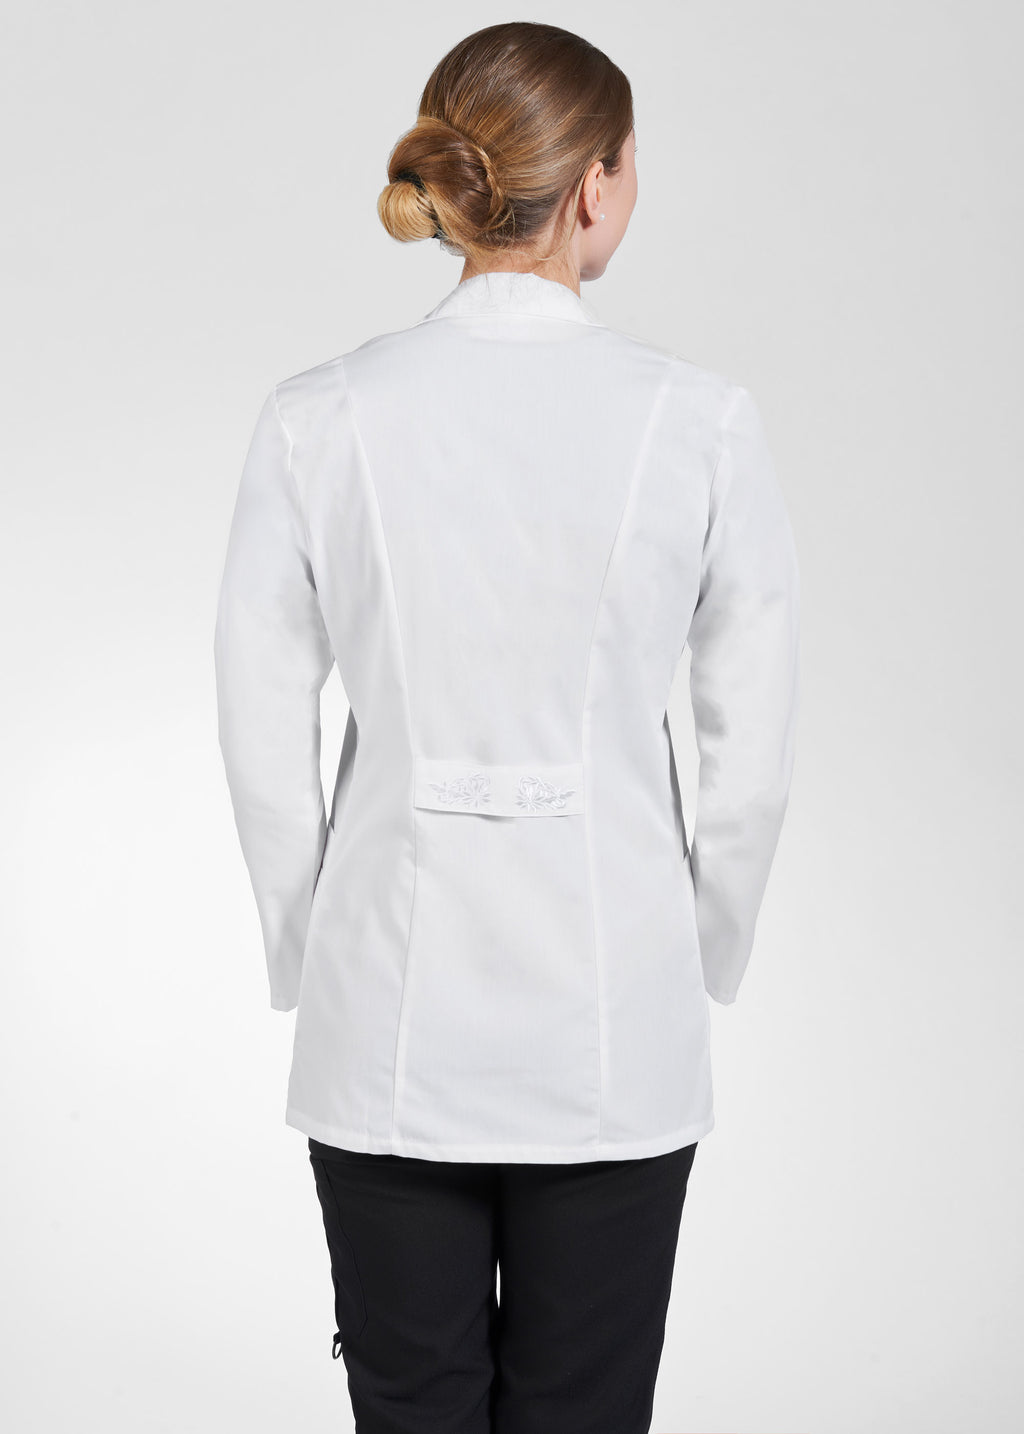 Product - MOBB Ladies Lightweight Fitted Lab Coat